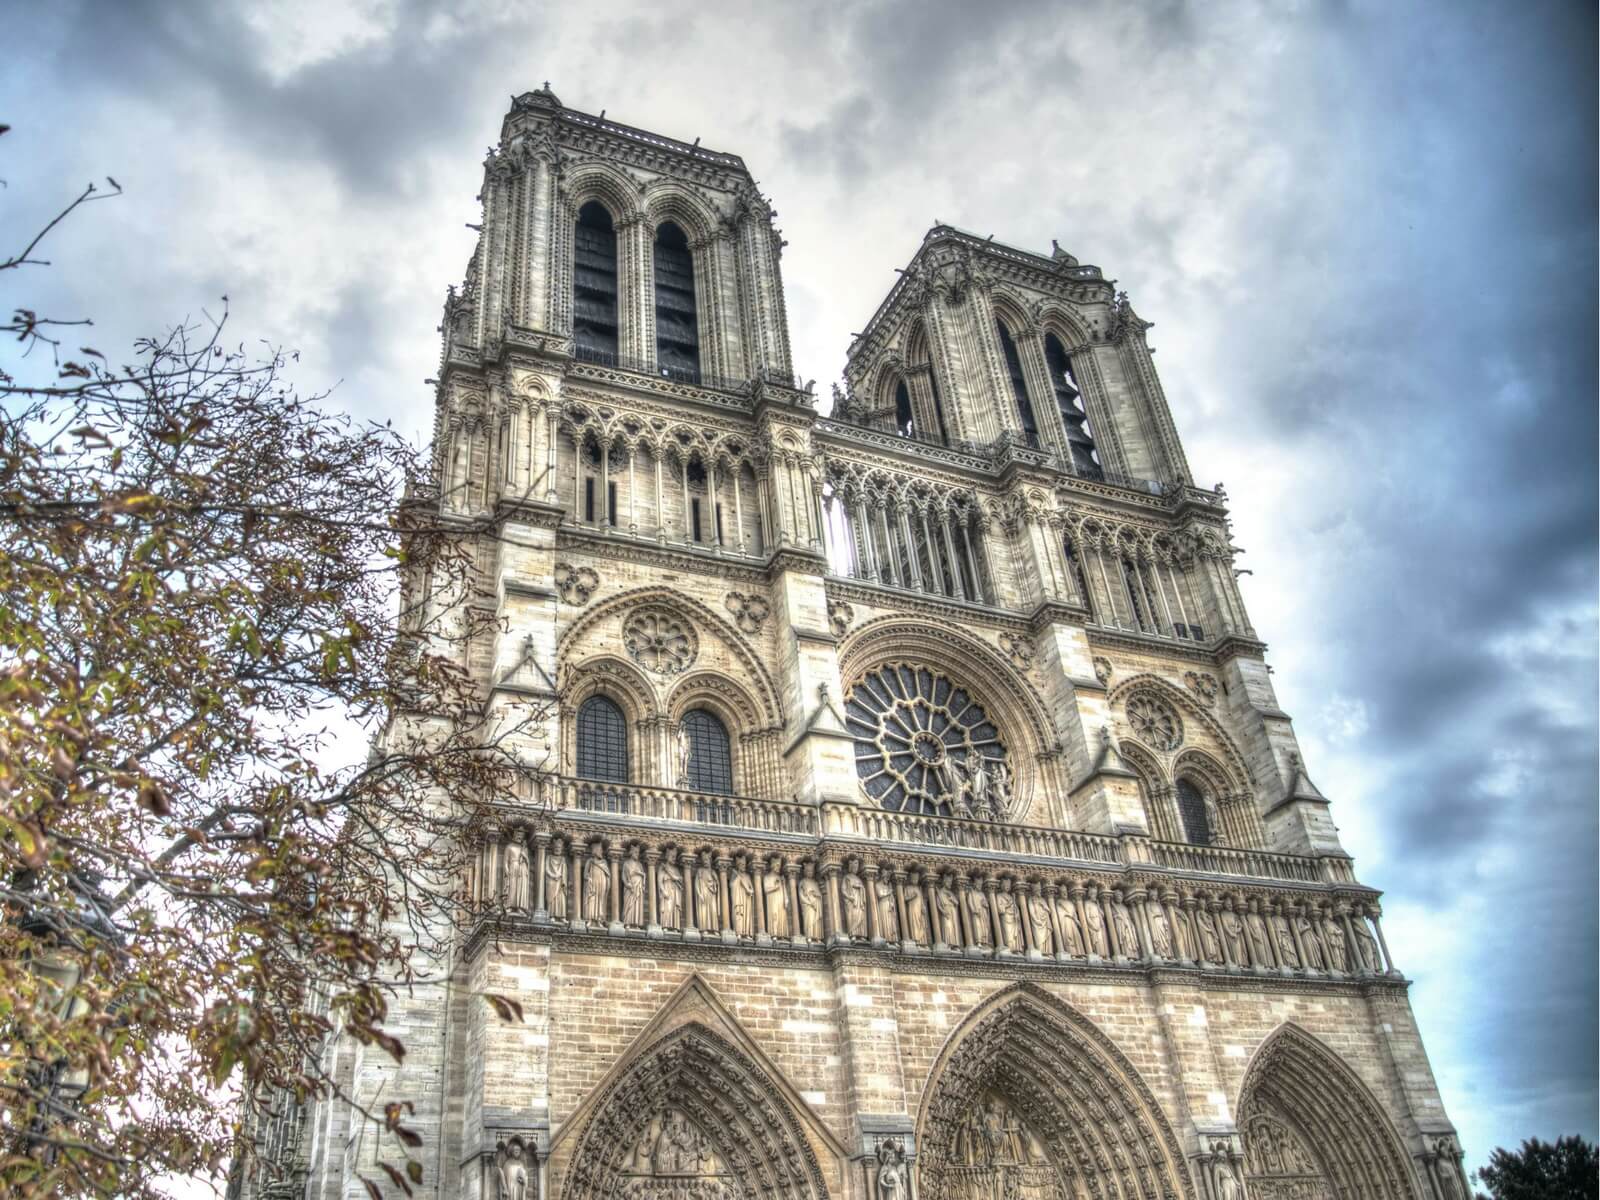 The Hunchback of Notre Dame: How Victor Hugo's Story Saved the Cathedral